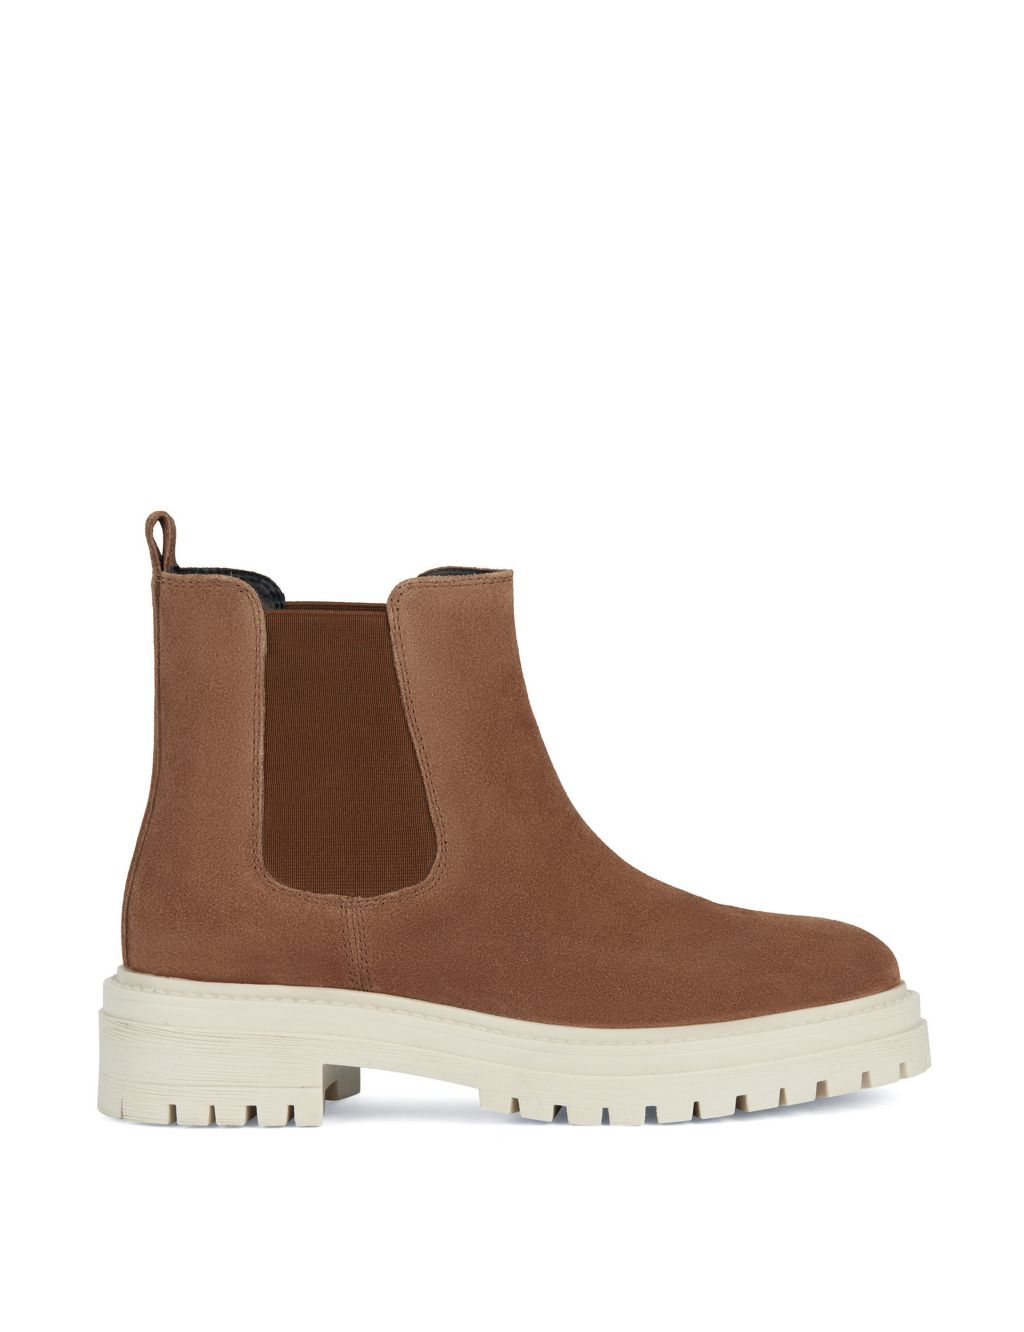 Suede Chelsea Cleated Ankle Boots image 1